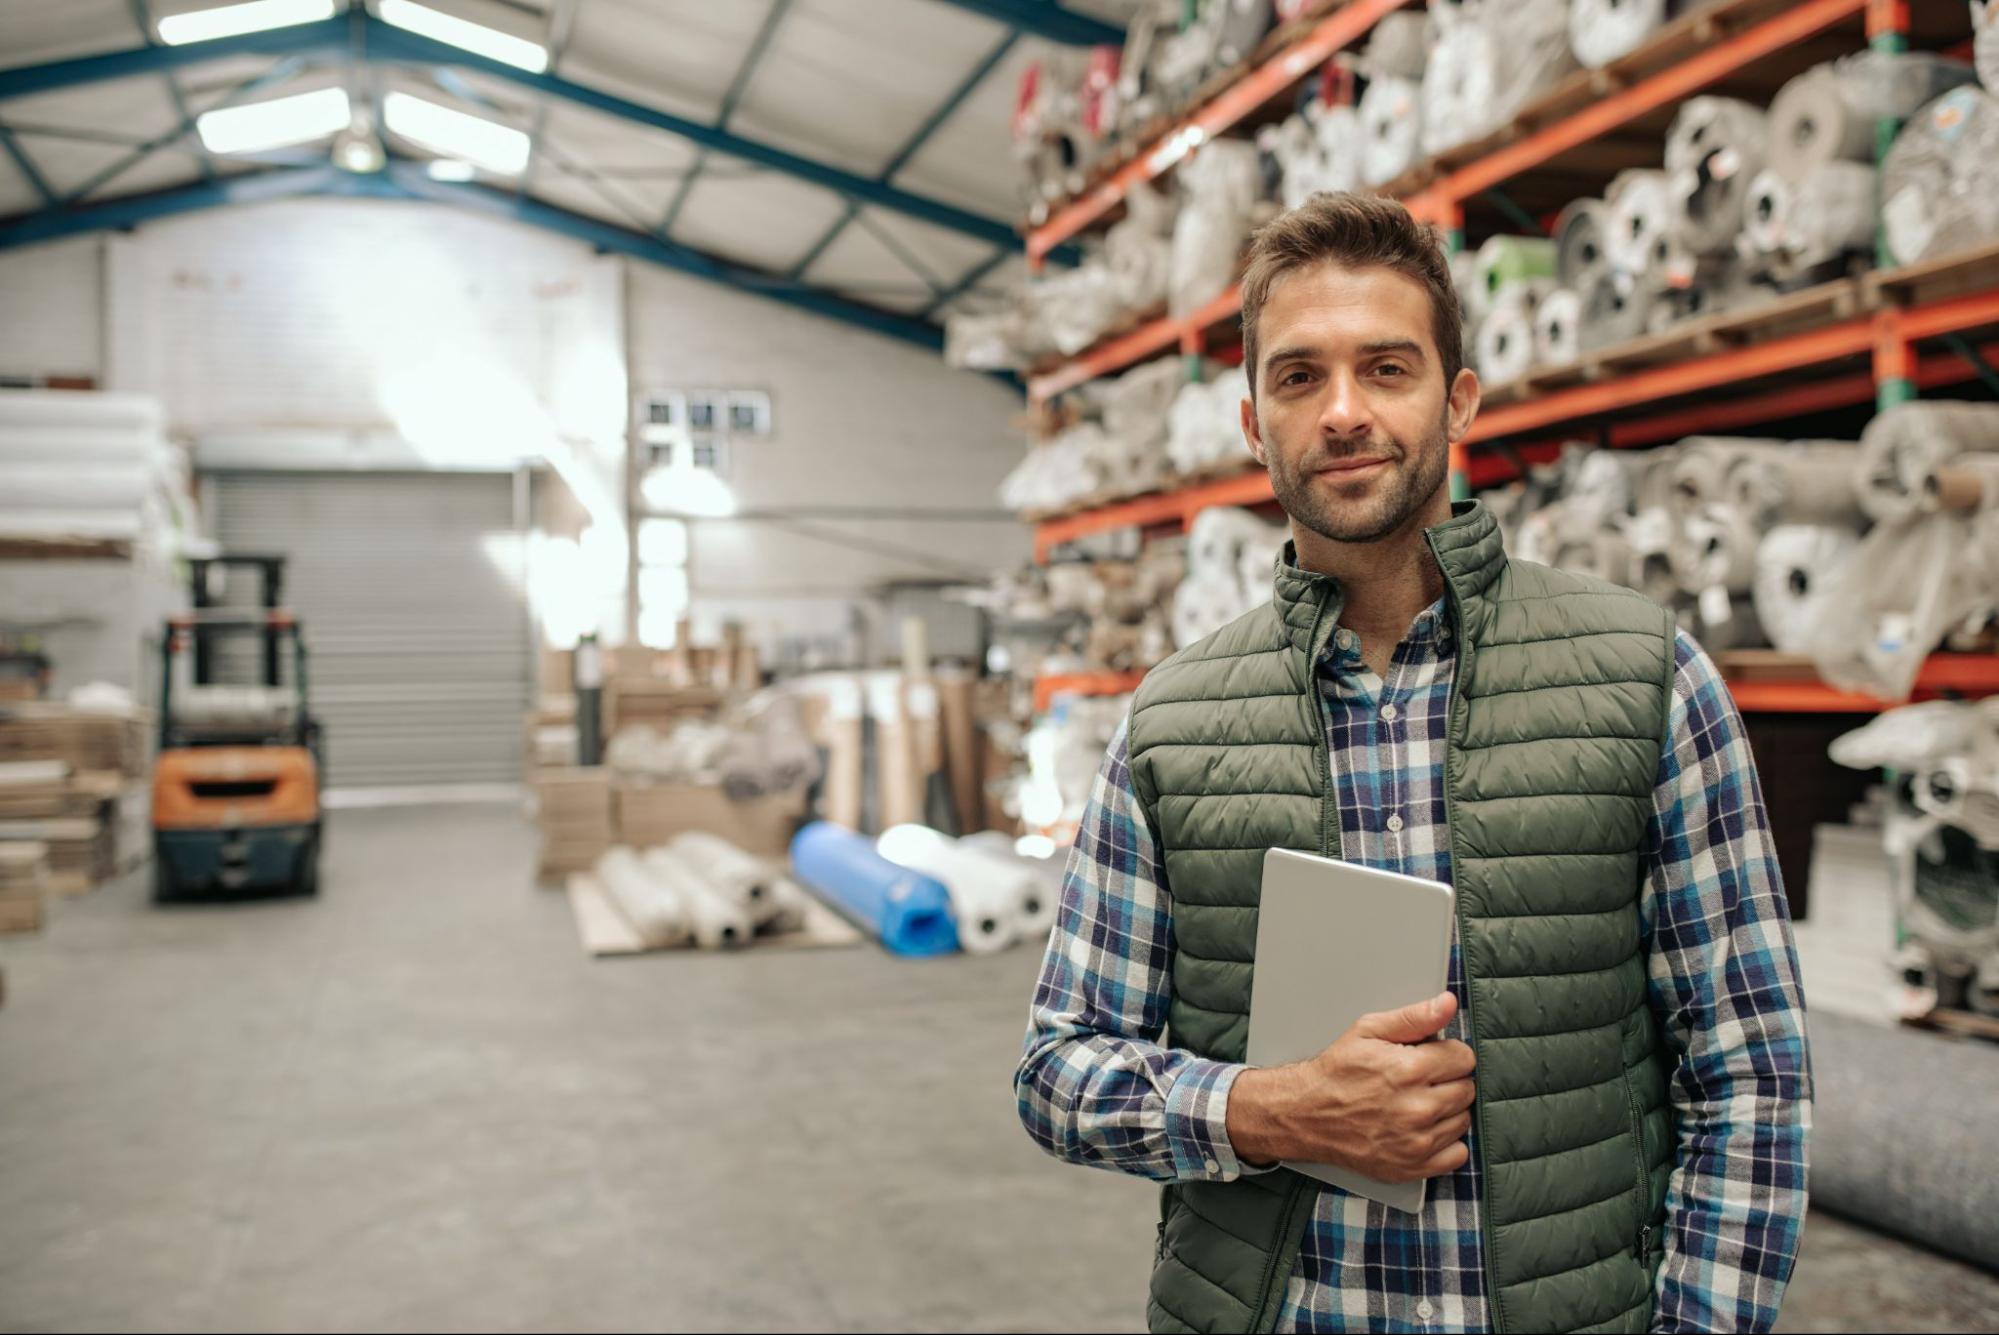 Man in a plaid shirt and green vest holding a tablet, standing in a warehouse filled with rolls of fabric and materials on shelves, with a forklift in the background.